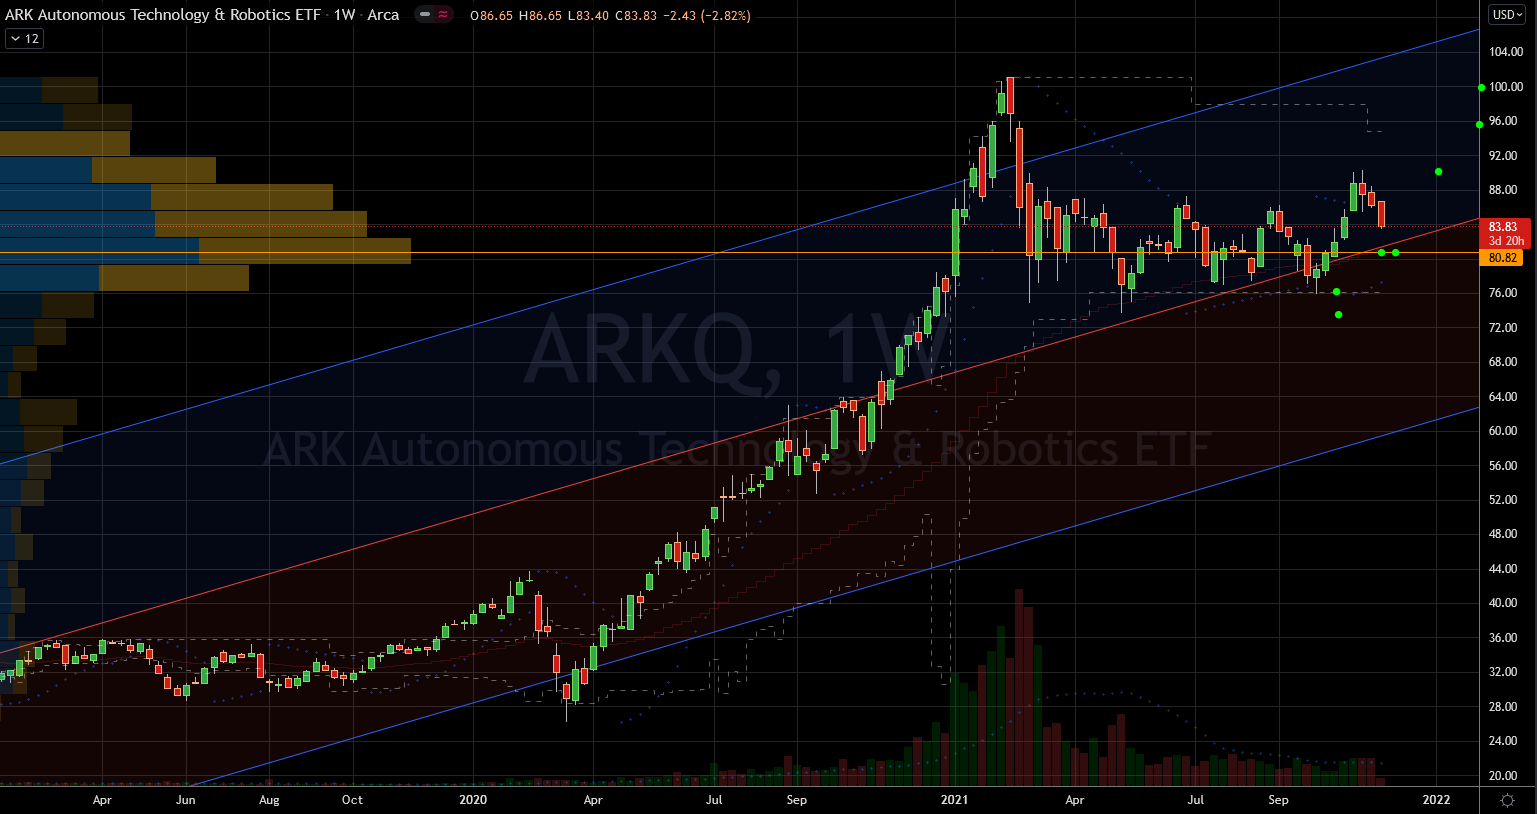 Stocks to Buy: ARK Autonomous Technology & Robotics ETF (ARKQ) Stock Chart Showing Potential Support